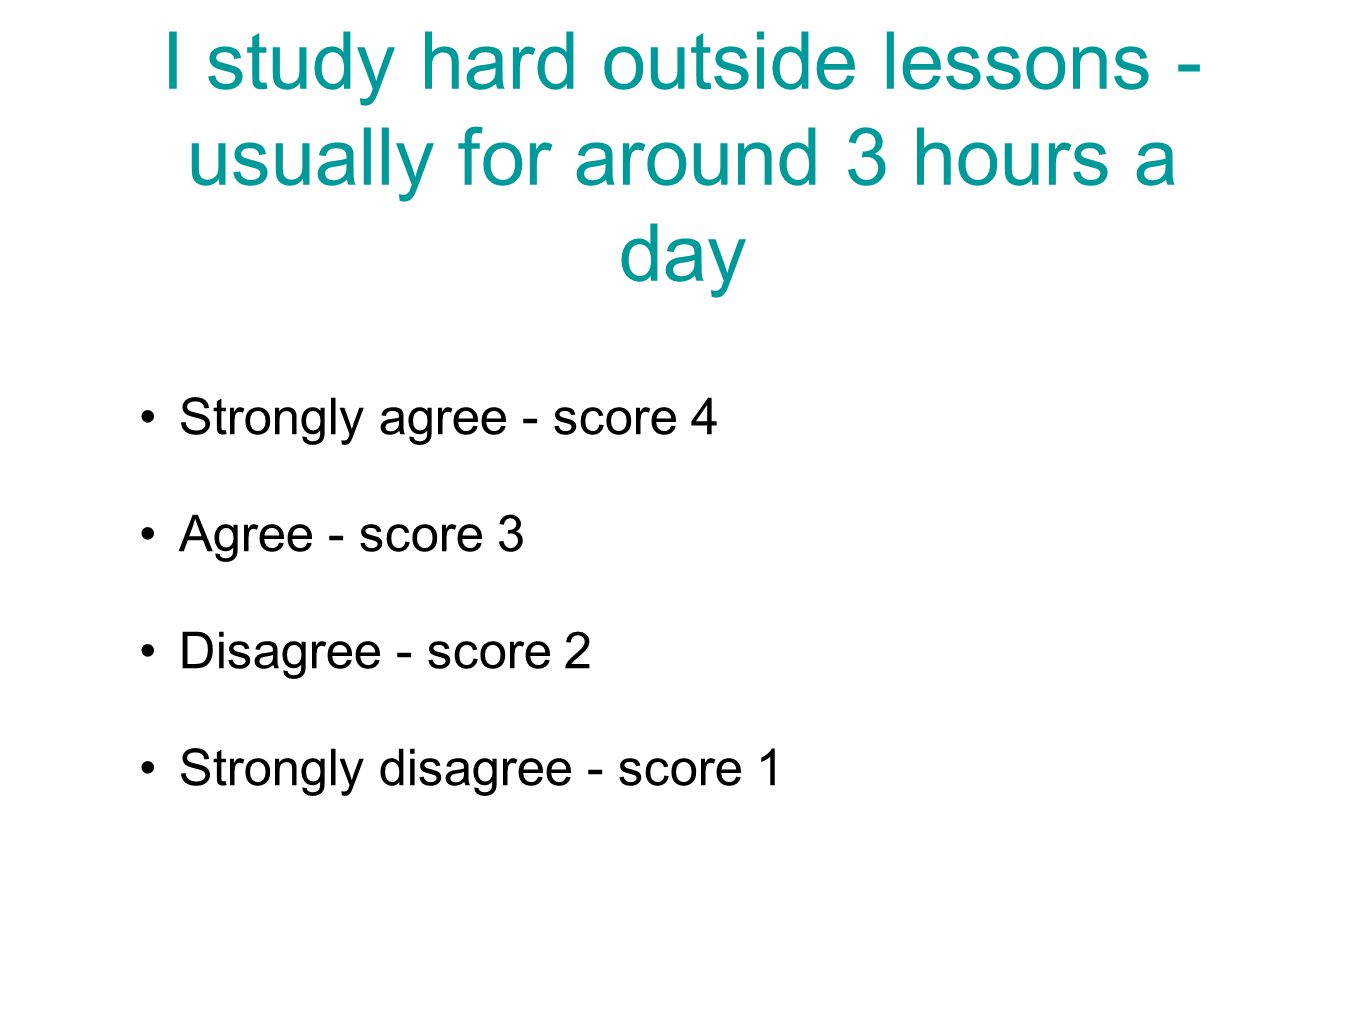 I study hard outside lessons - usually for around 3 hours a day Strongly agree - score 4 Agree - score 3 Disagree - score 2 Strongly disagree - score 1